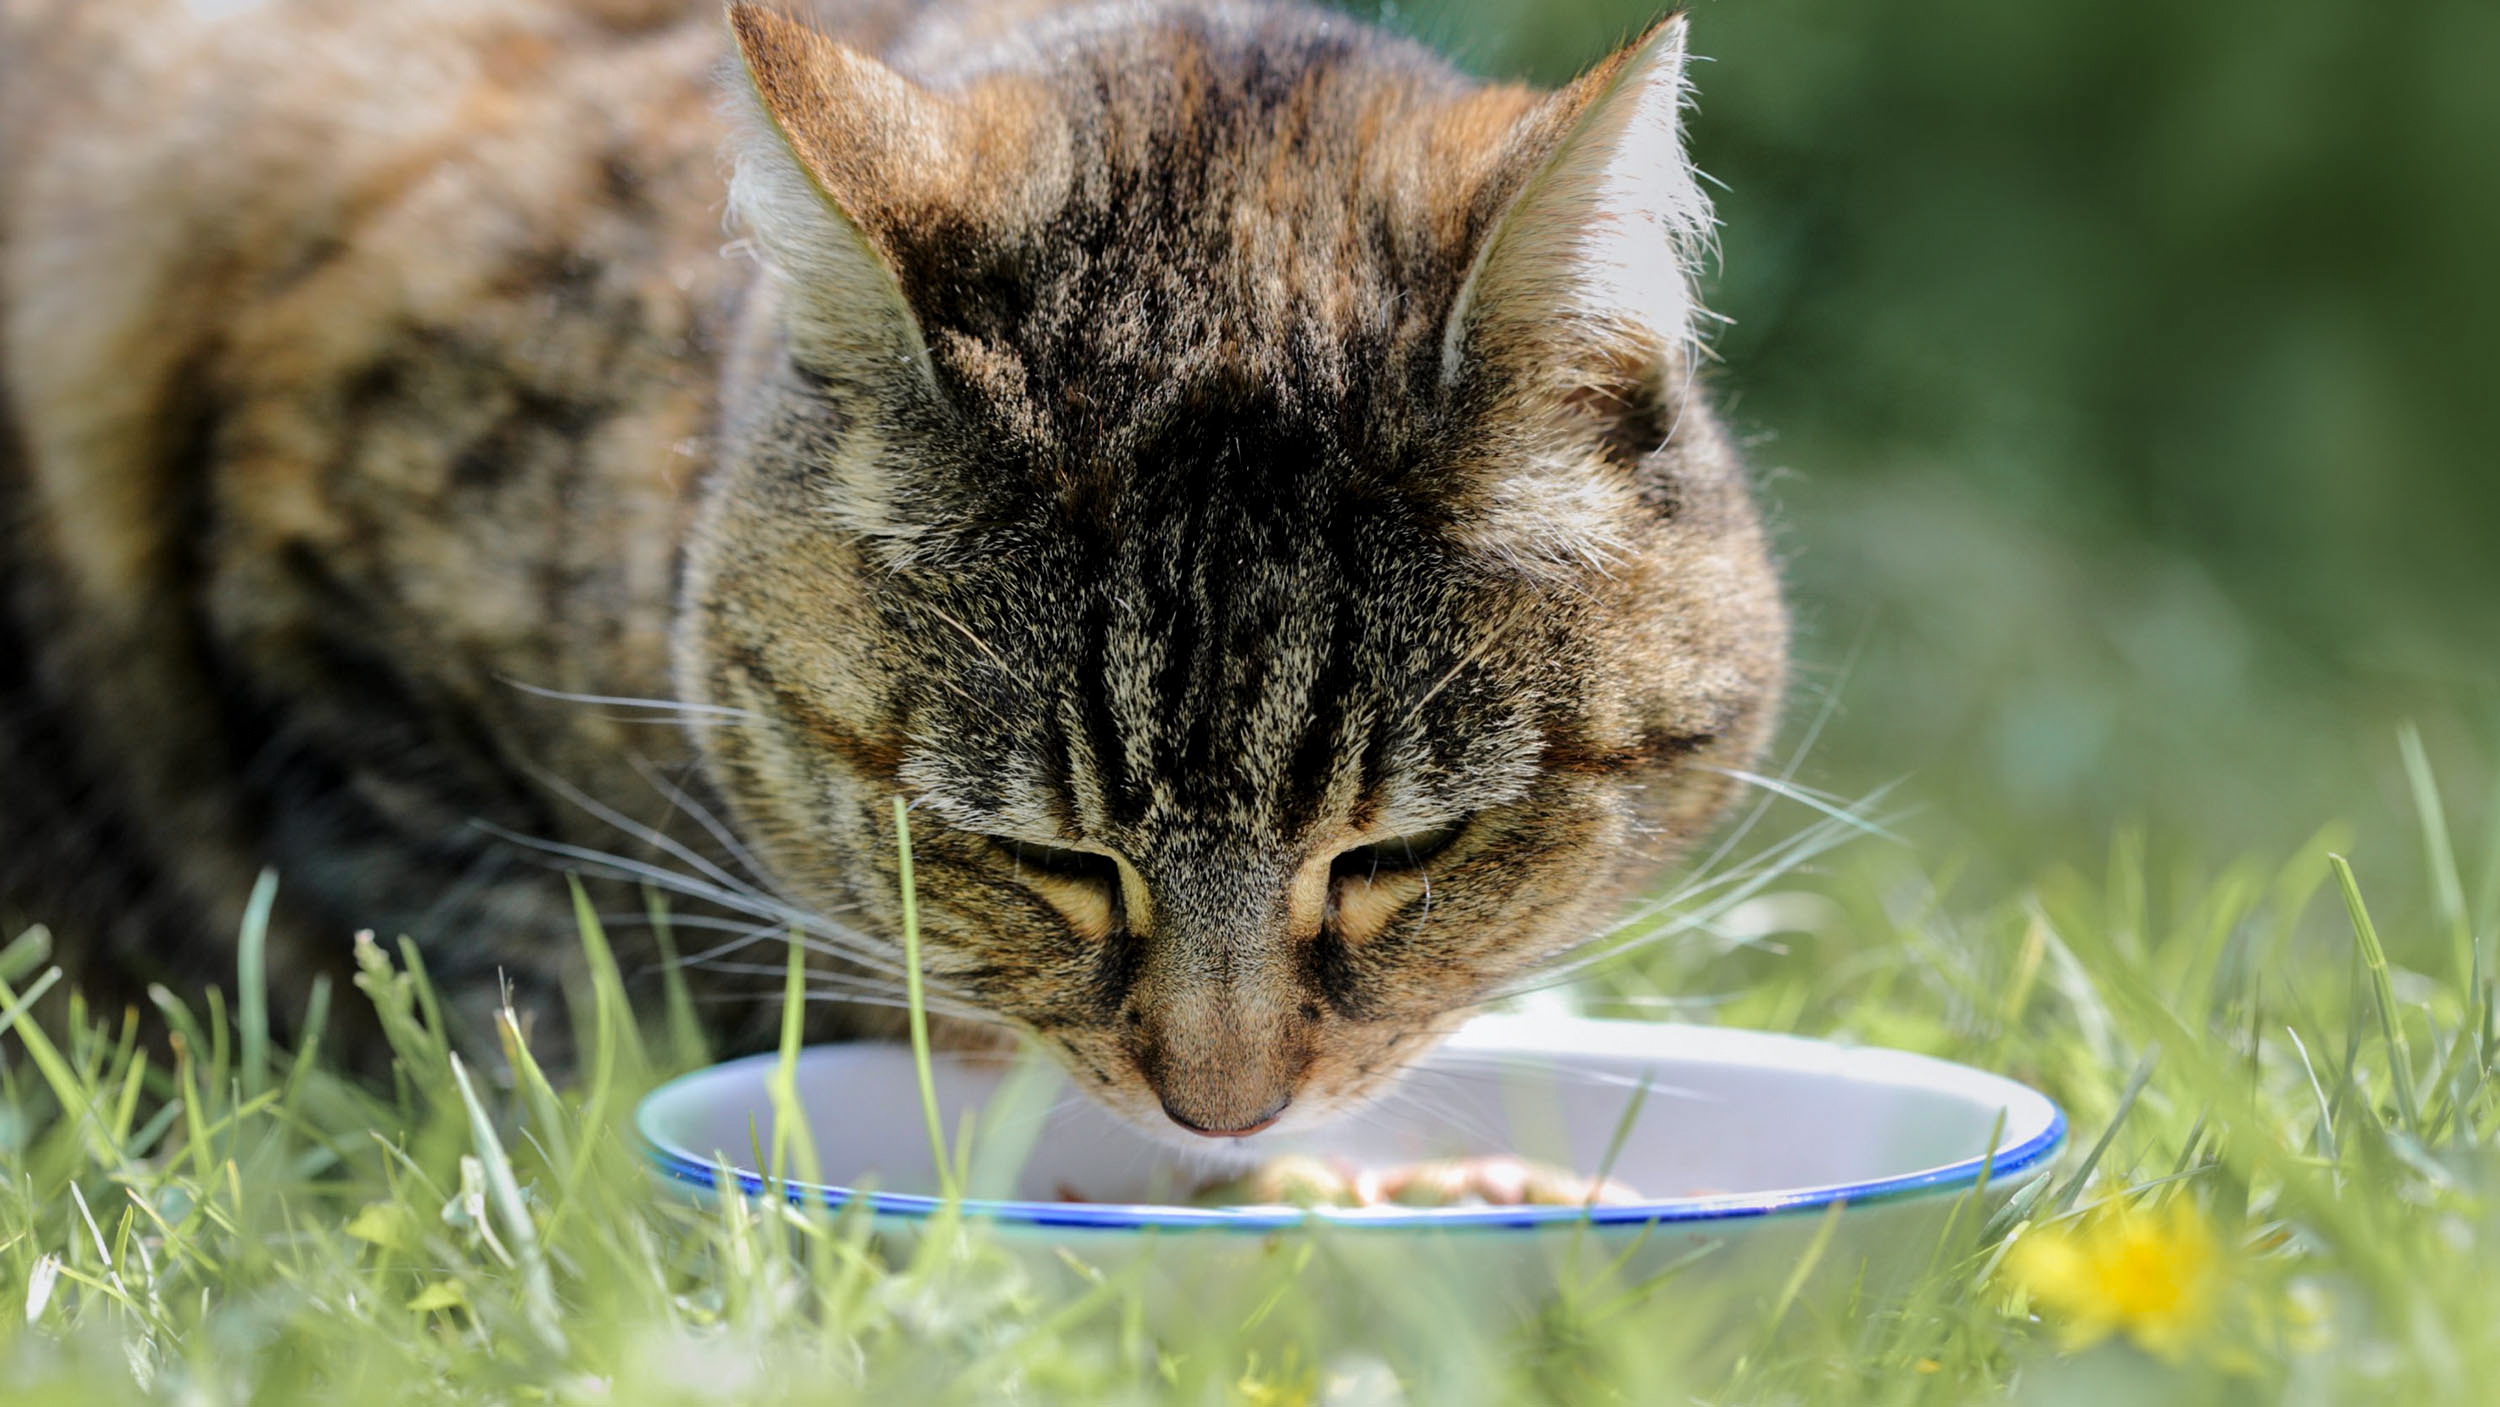 Adult cat standing outside on grass eating from a white bowl.